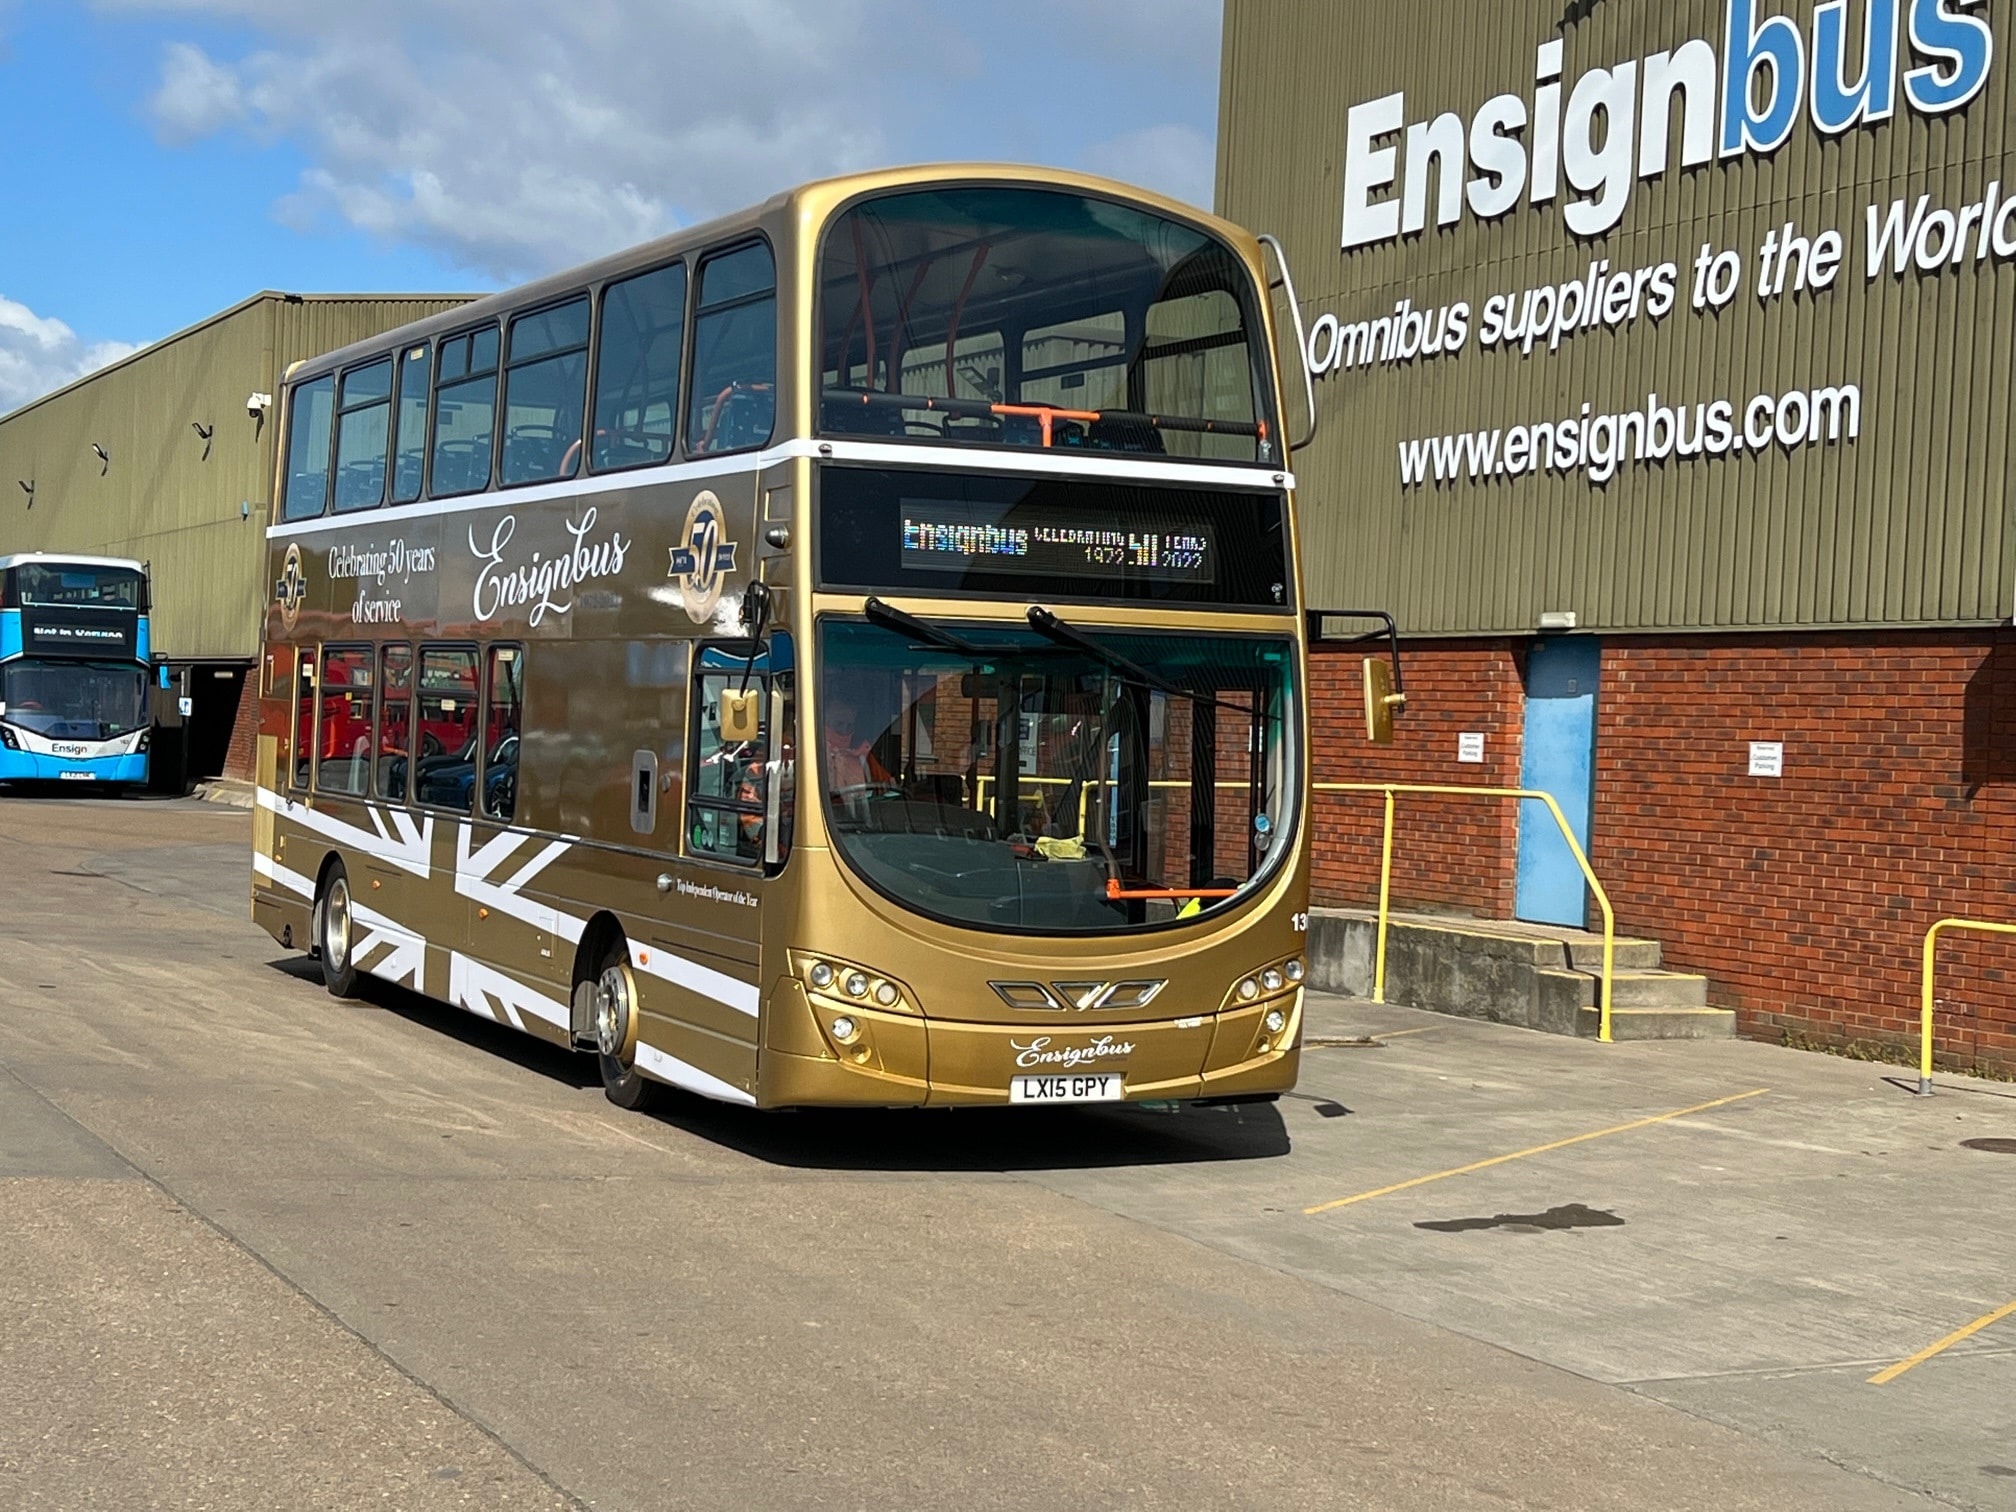 Ensignbus marks 50th anniversary with gold bus